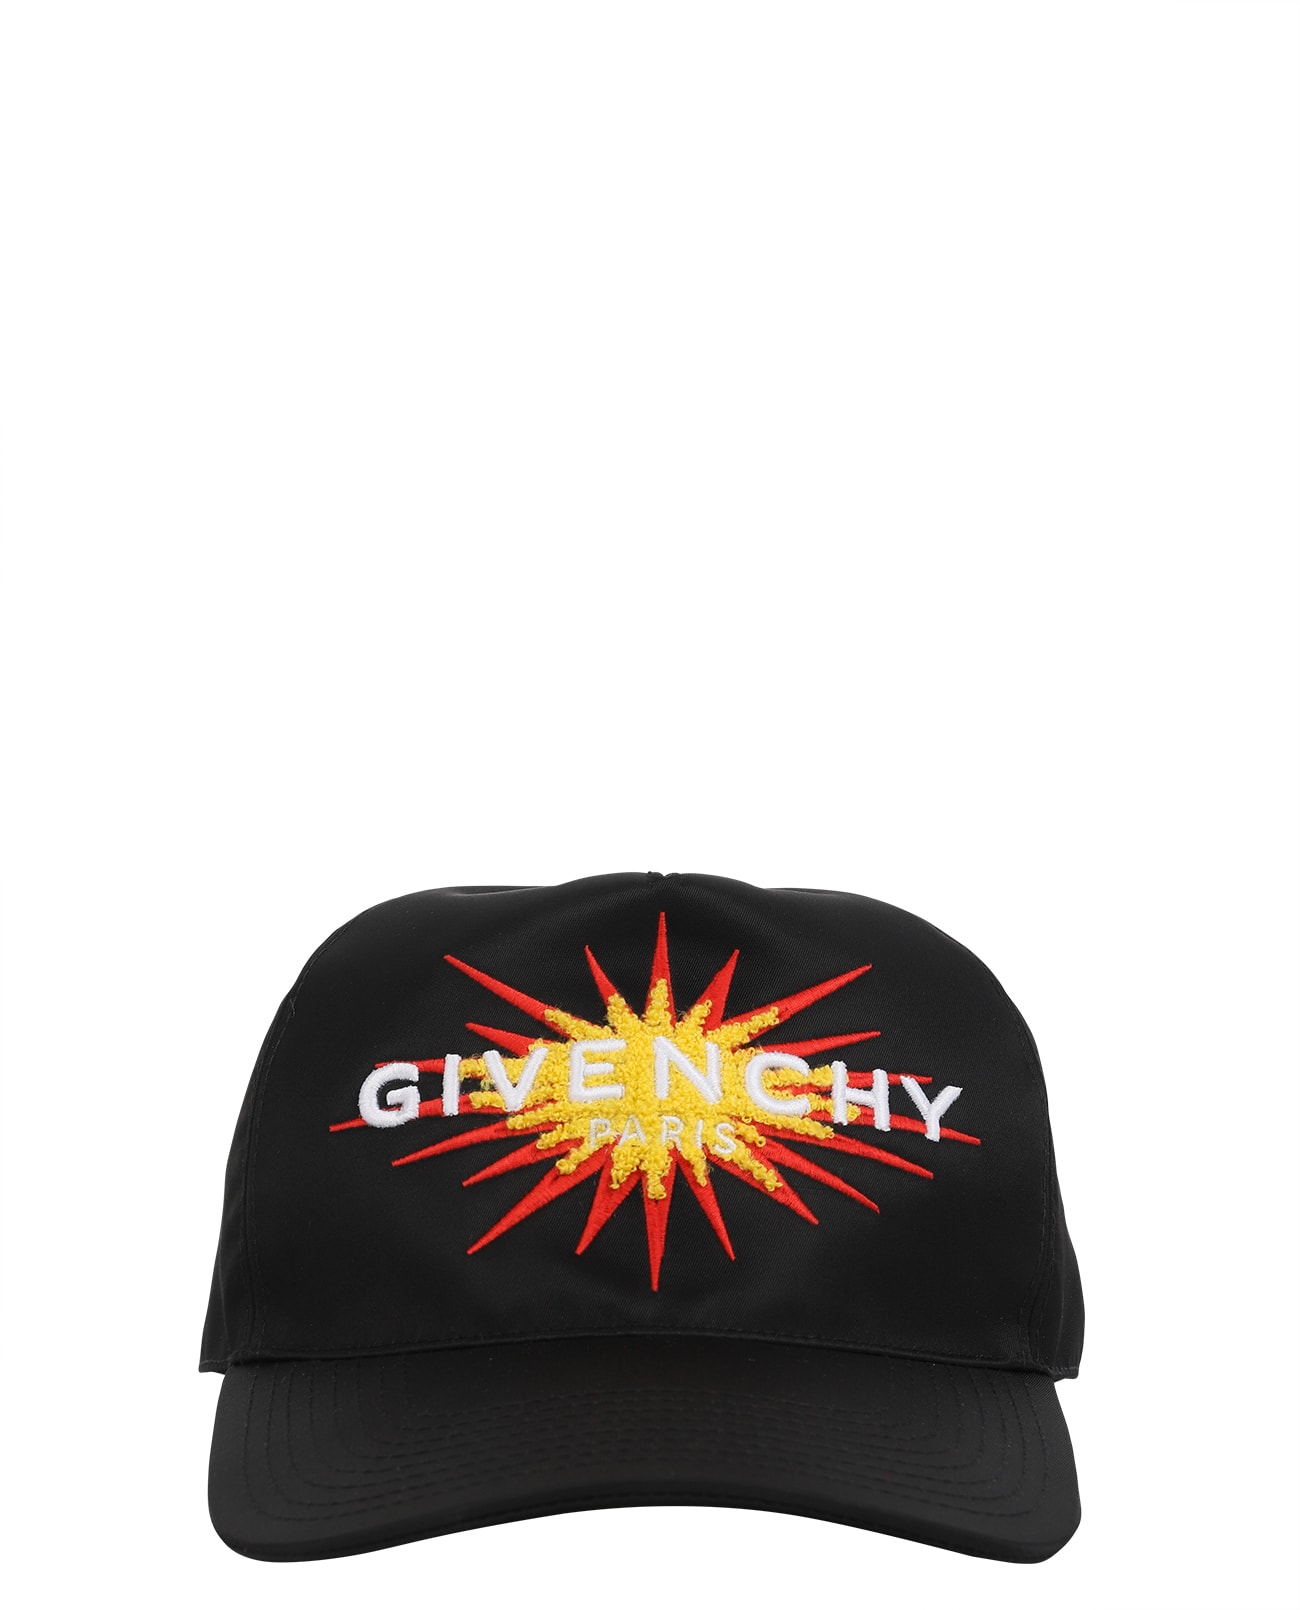 GIVENCHY BLACK CURVED CAP,11296378